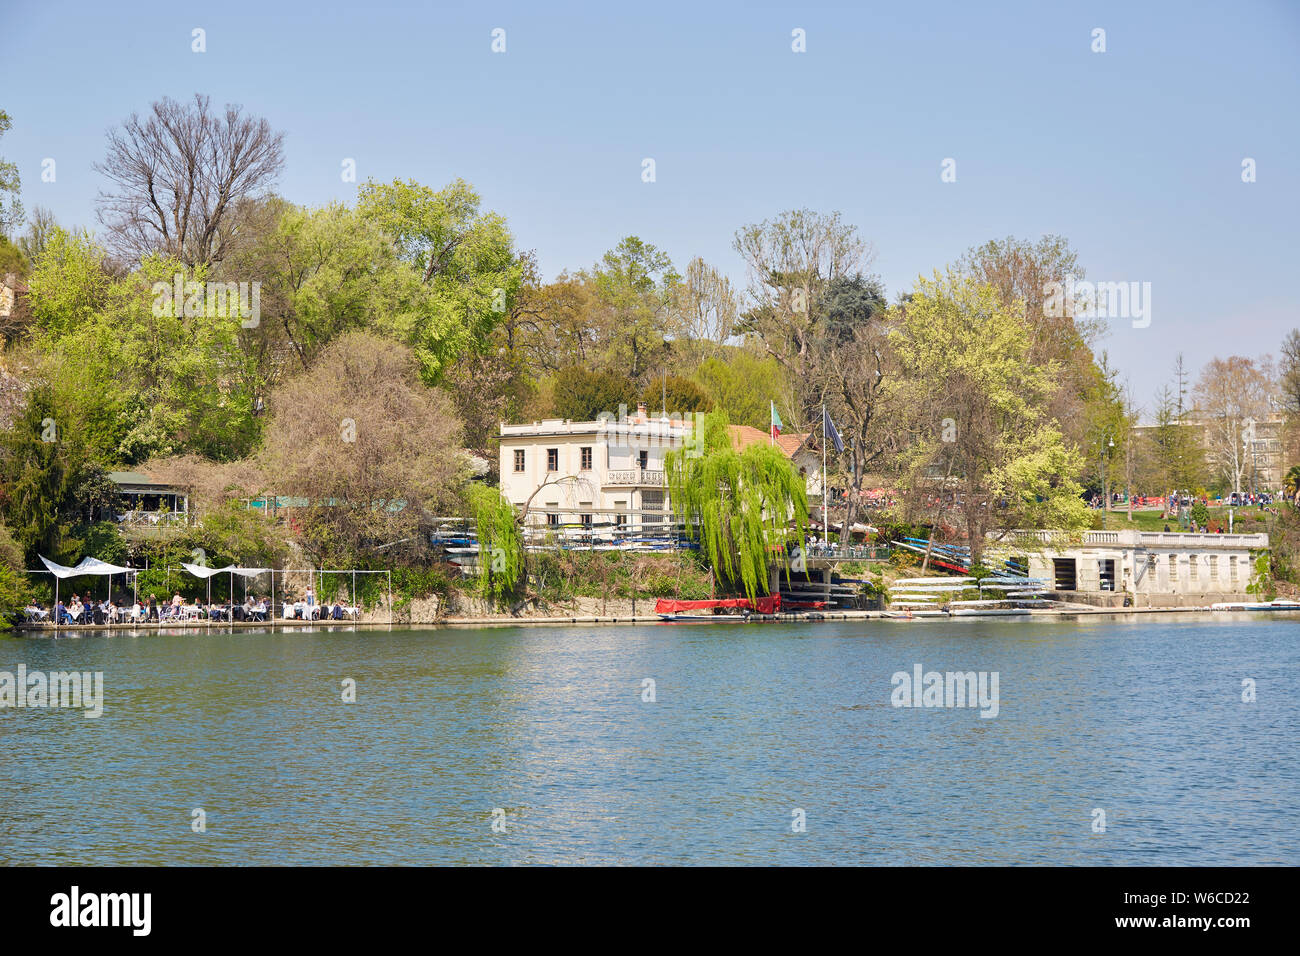 TURIN, ITALY - MARCH 31, 2019: Armida Rowing Club building and terrace with people, Po river in Piedmont, Turin, Italy. Stock Photo